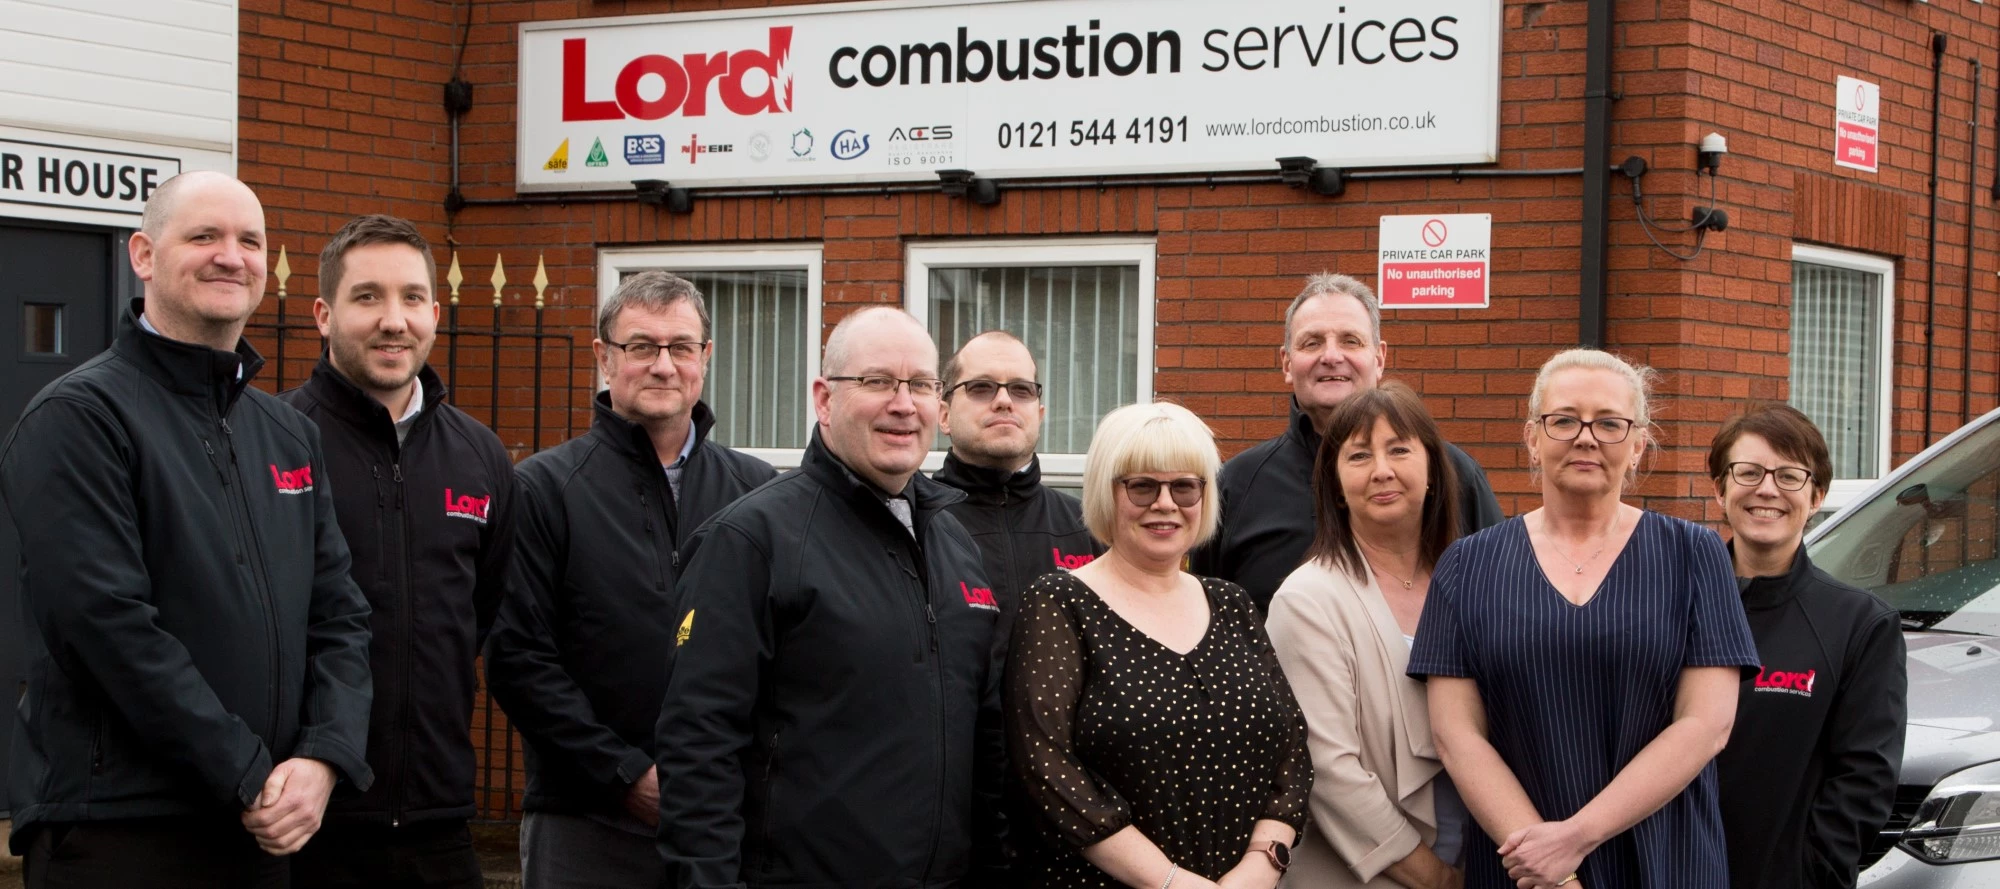 Part of the Lord Combustion Services team outside their Oldbury HQ